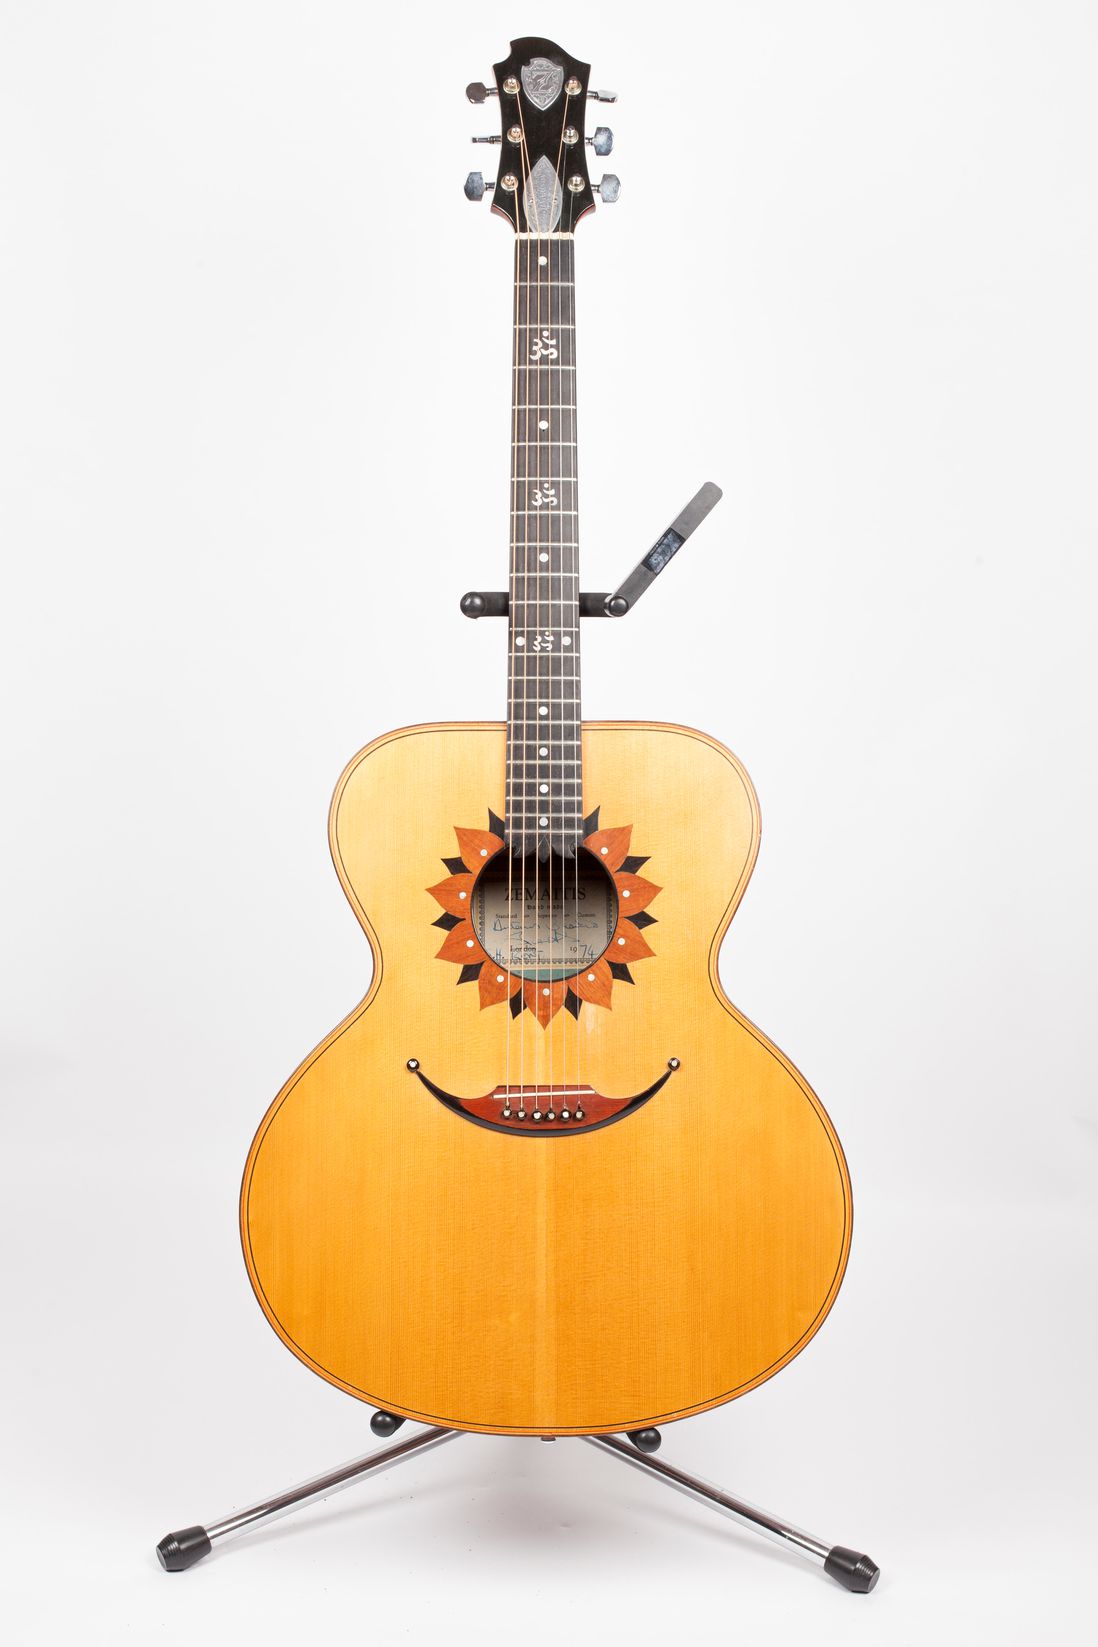 George Harrison's commissioned this “Lotus” acoustic, which features a Jumbo-size body with flower petal-shaped wooden inlays around the soundhole. Harrison ordered this six-string model as well as a twelve string version and used them extensively for his solo work in the latter half of the 1970s.